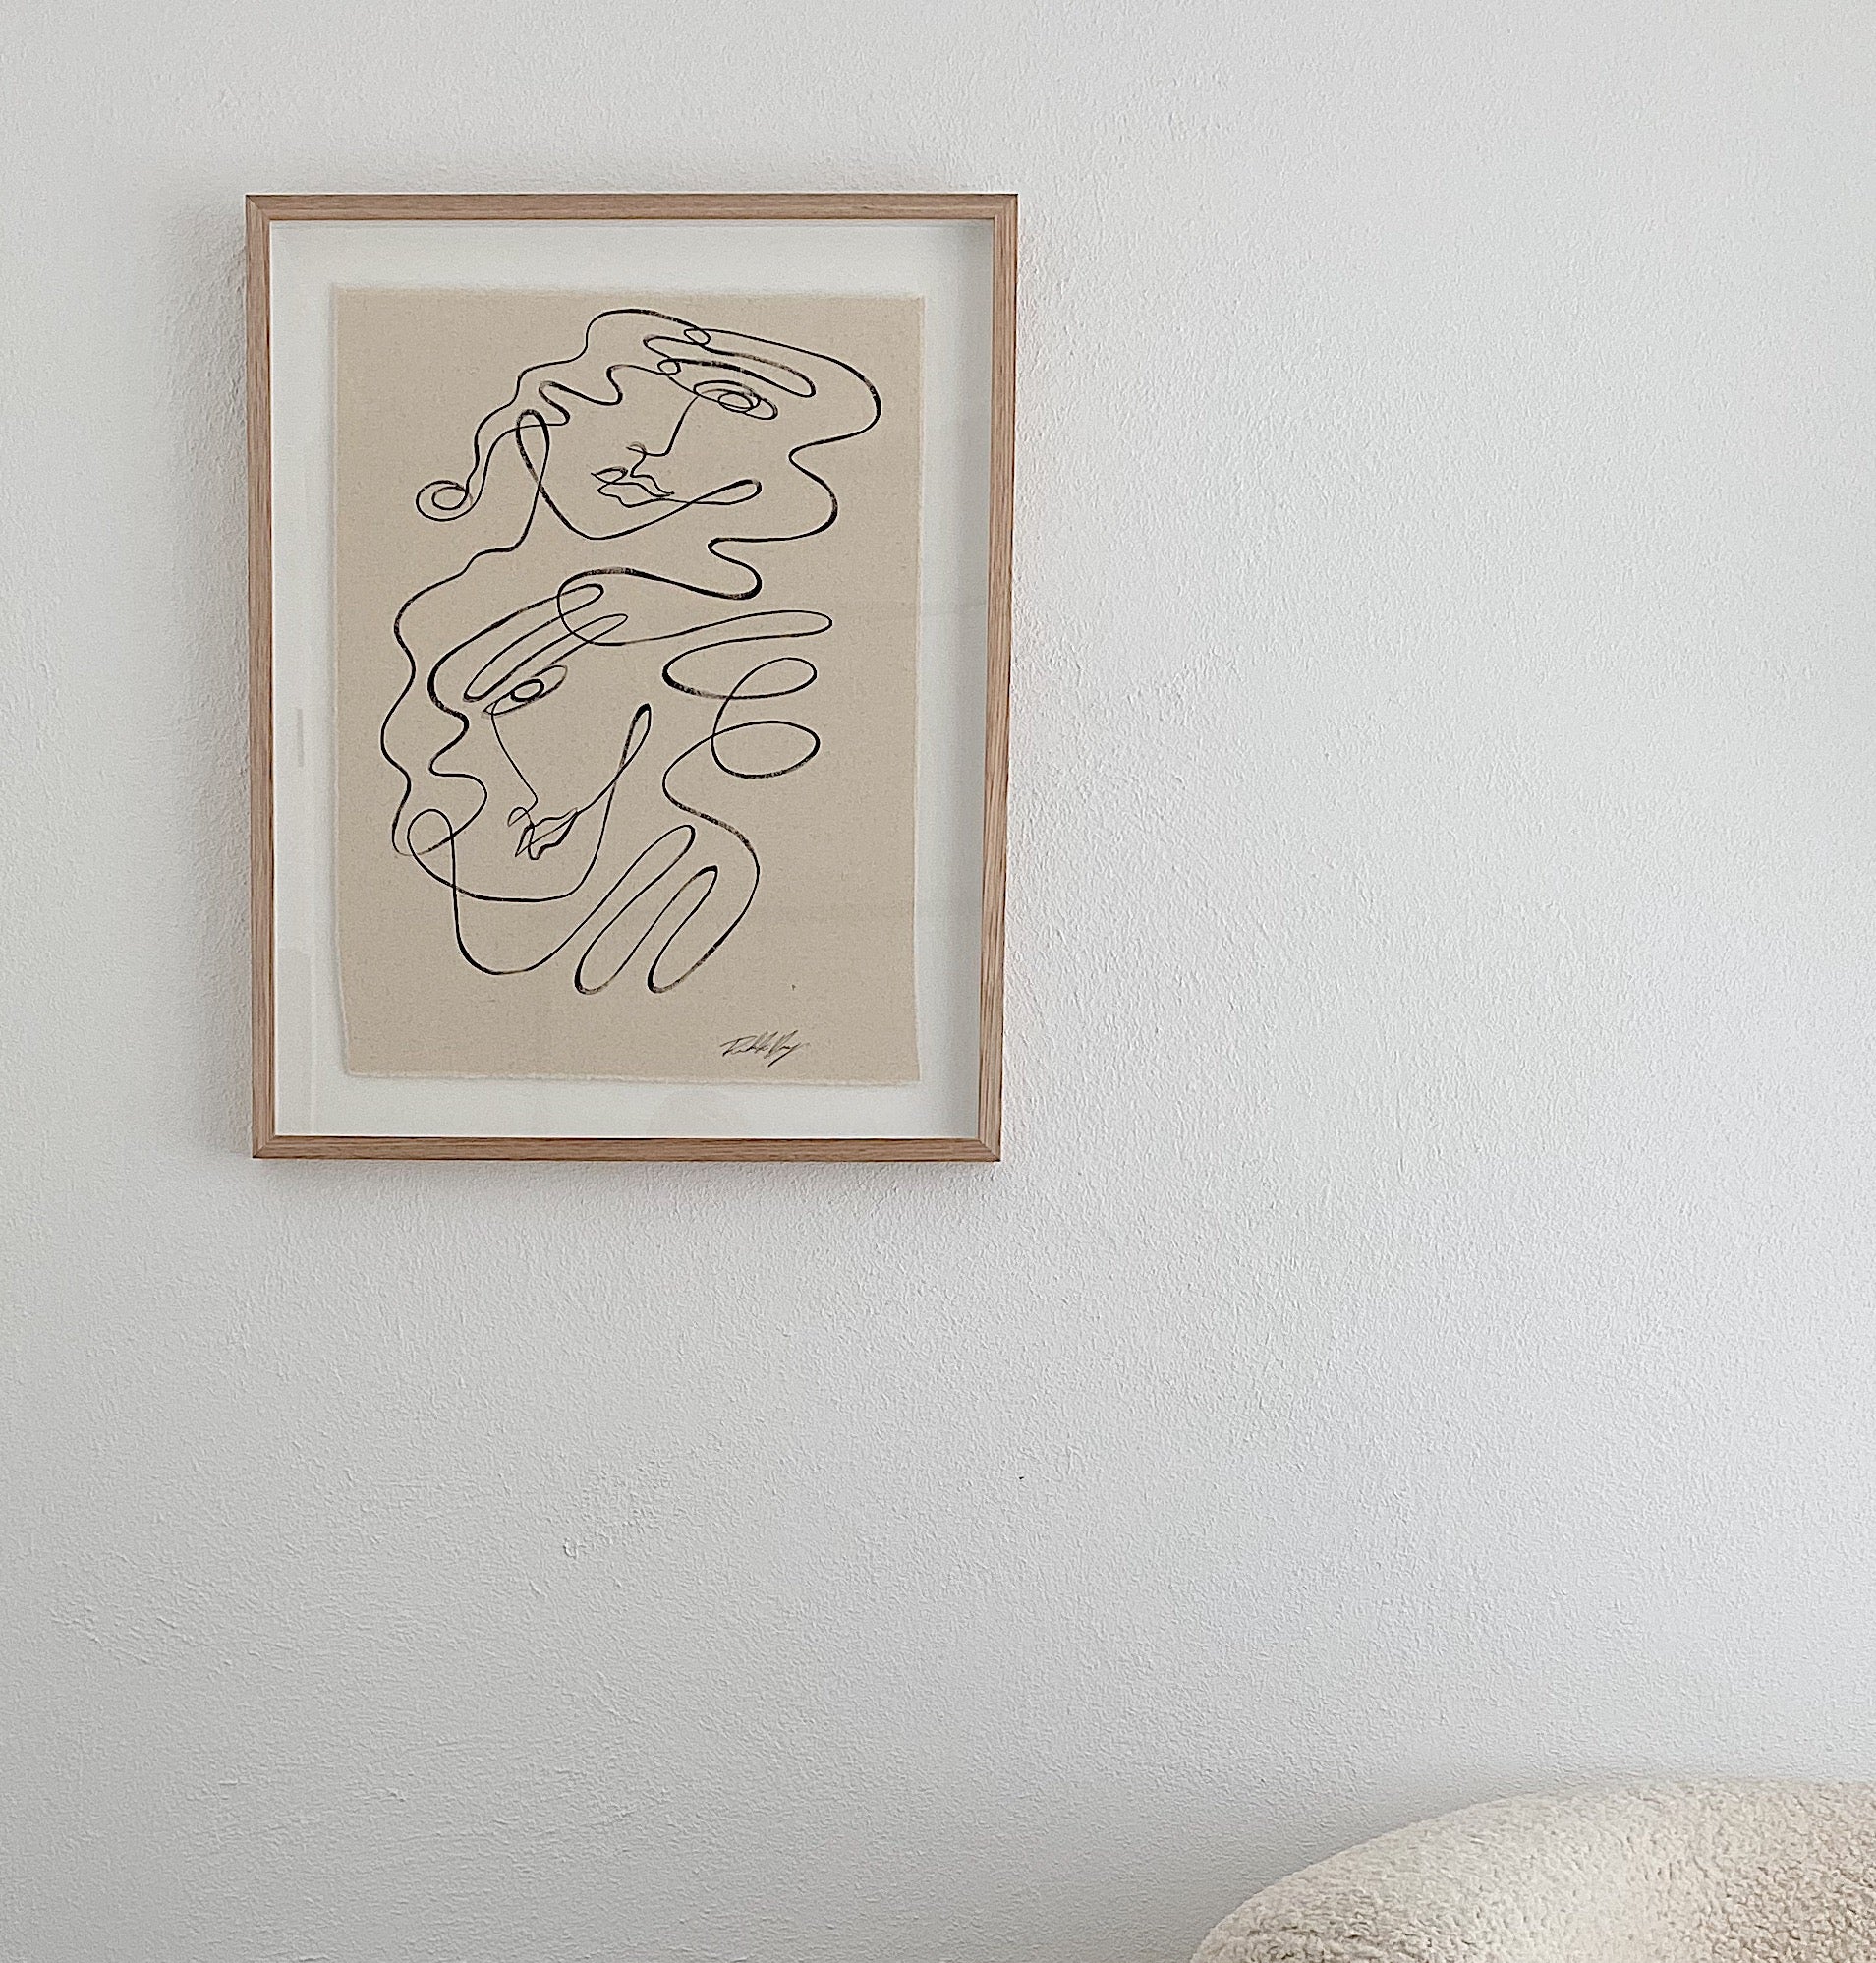 "Significant other"  -  Original Acrylic on cotton raw edged fabric, Framed in Tasmanian Oak. 760mm x 620mm